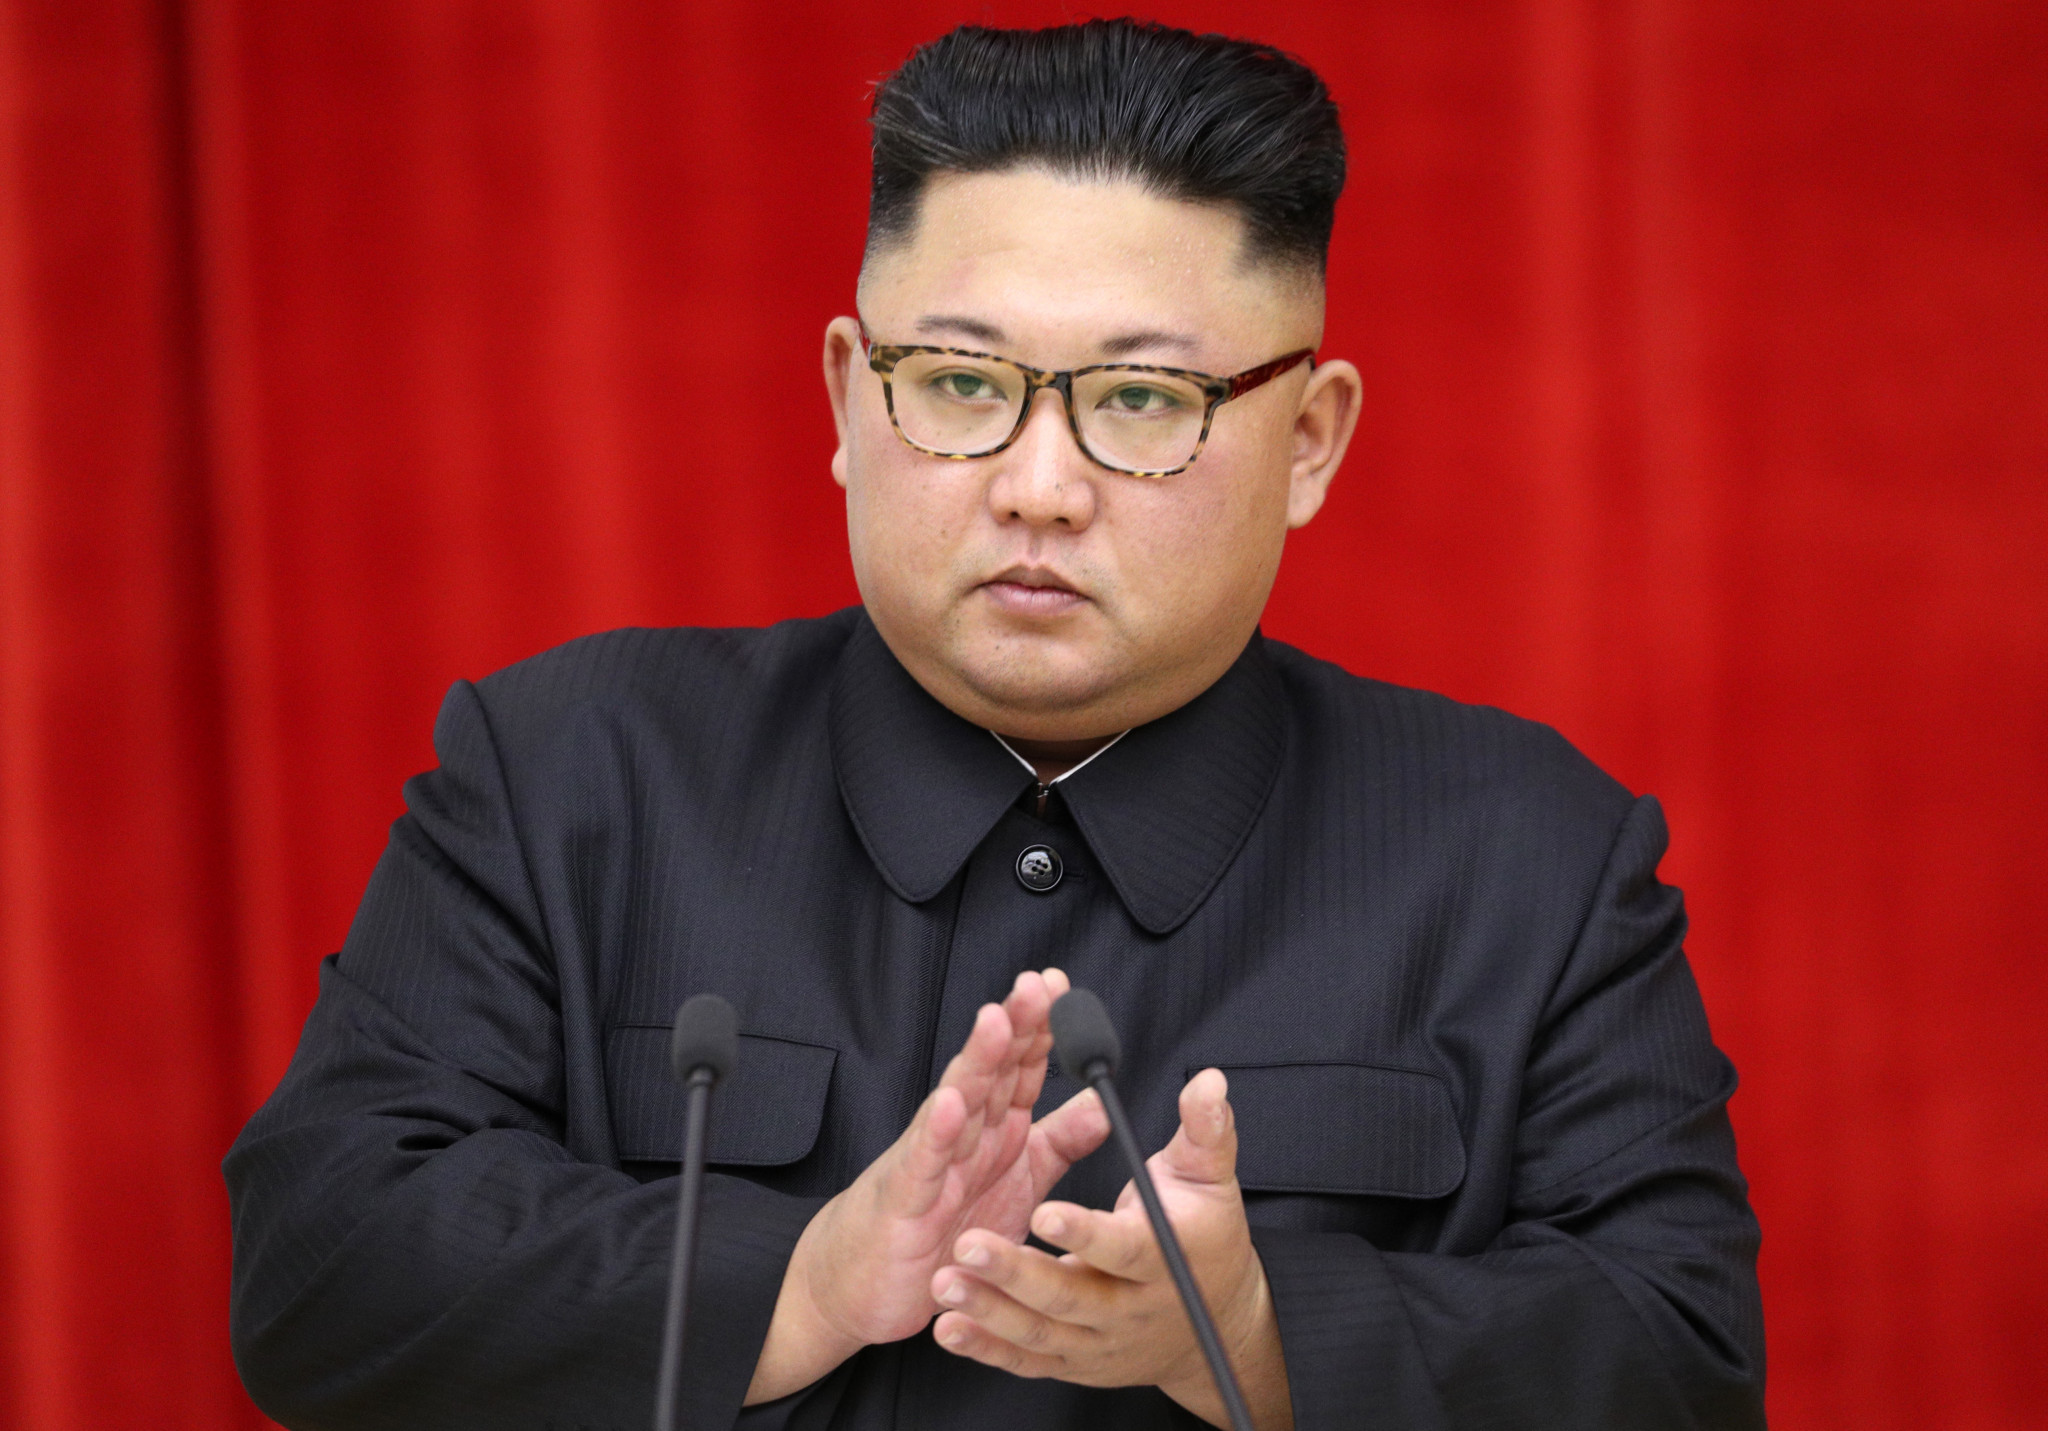 Japanese official plays down reports of Tokyo 2020 invite for Kim Jong-un